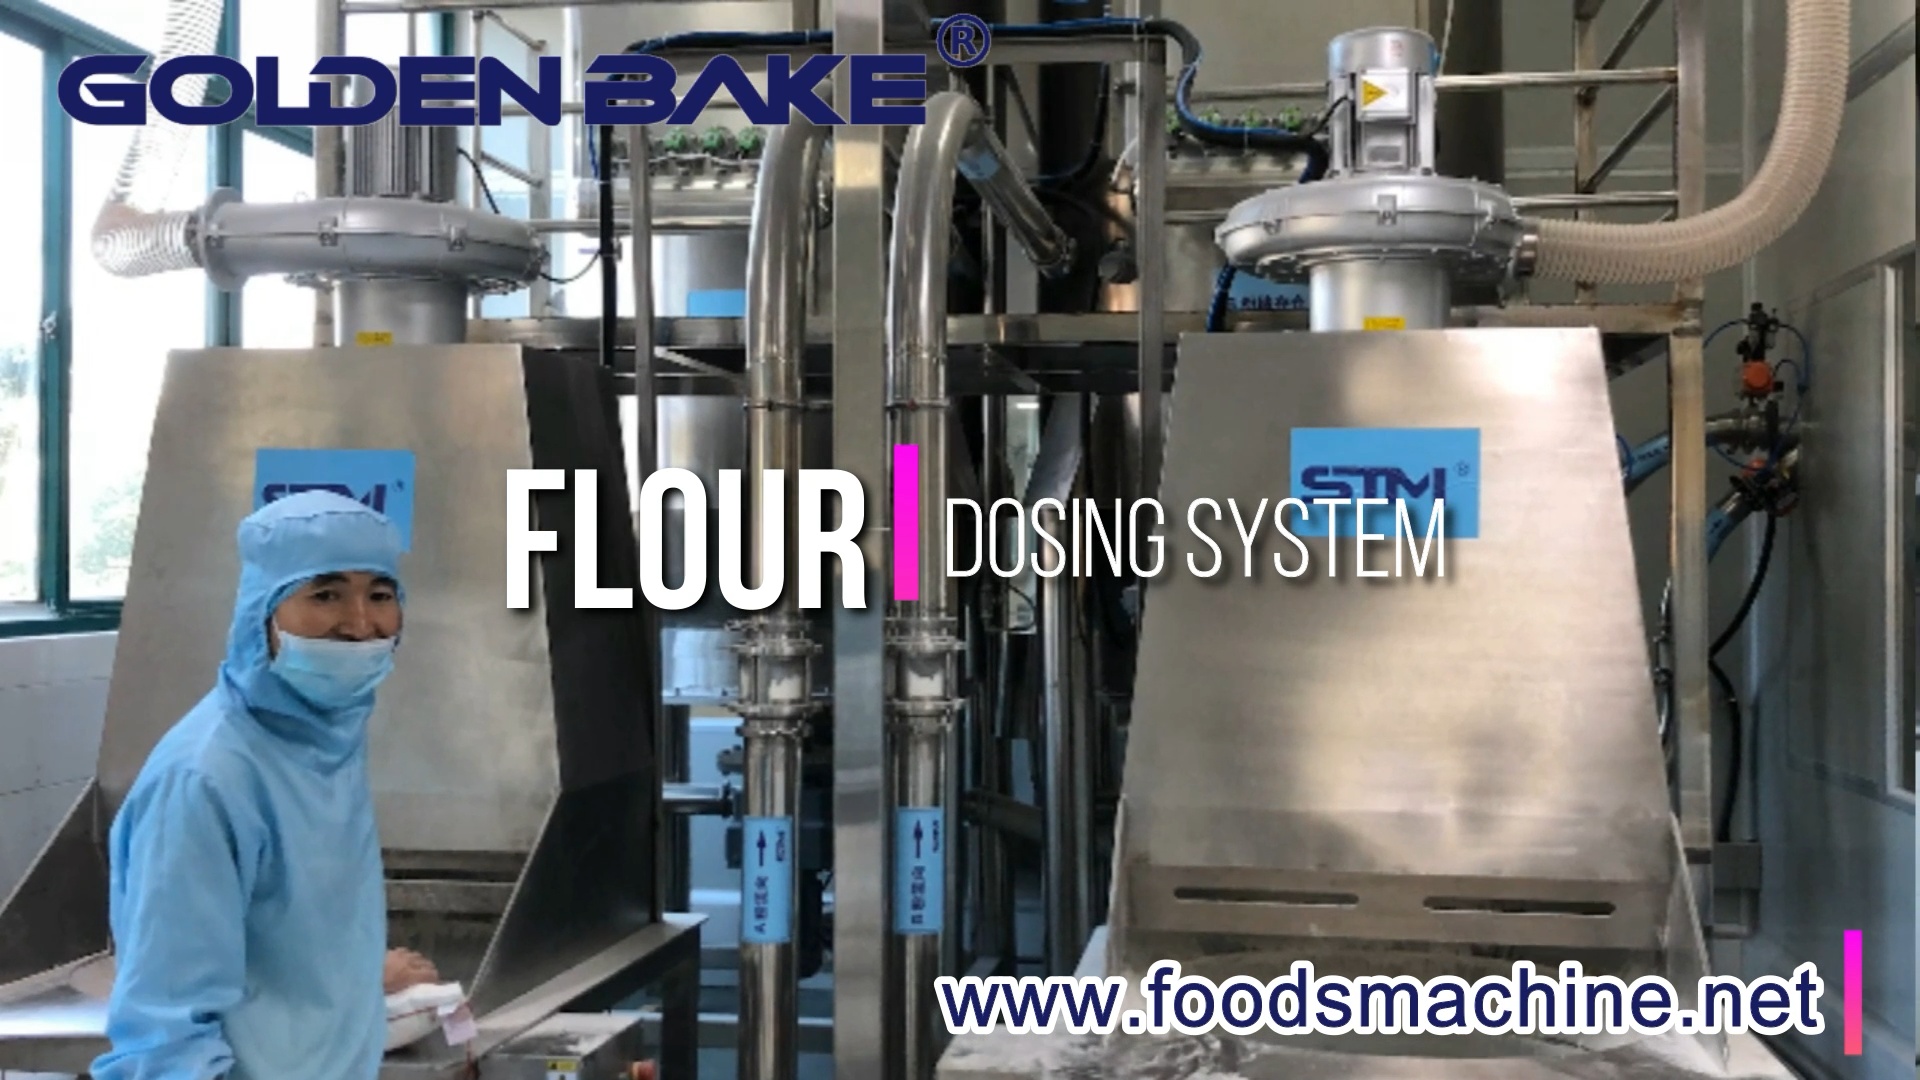 Golden Bake Automatic Material Dosing System